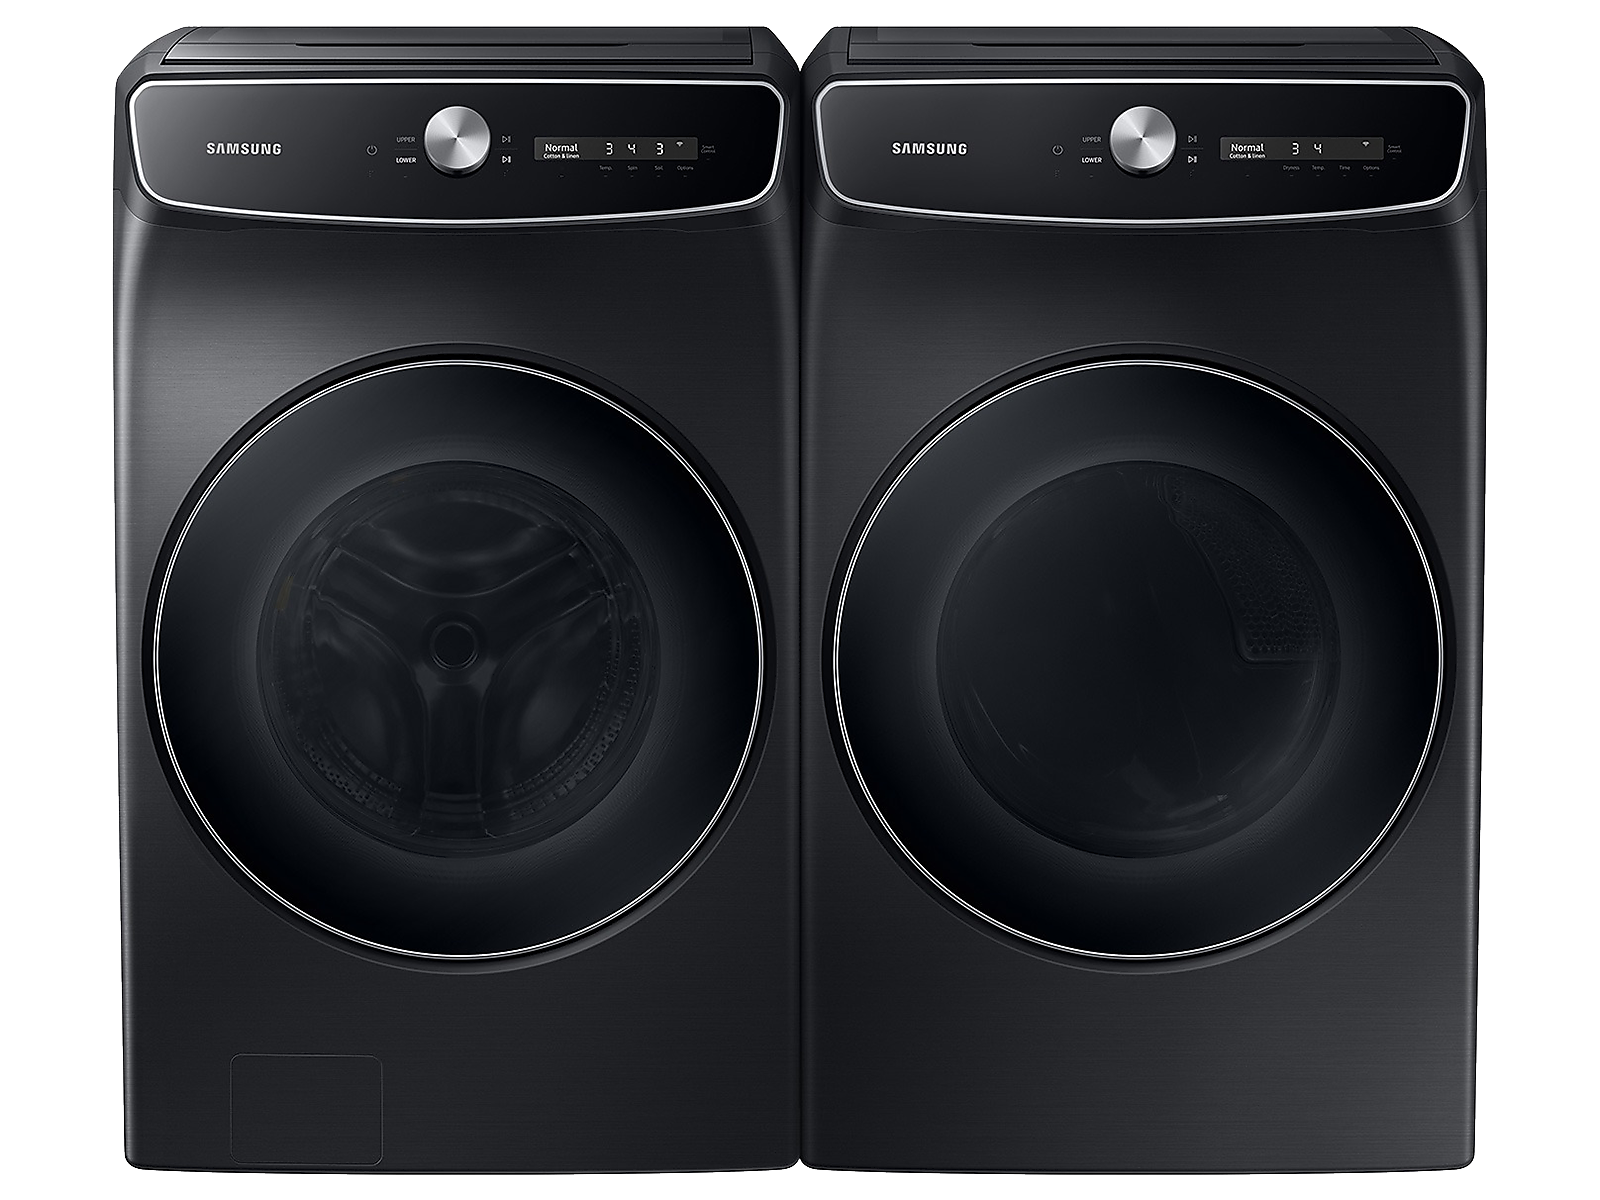 Samsung Smart Dial FlexWash™ and Super Speed Wash Washer and Smart Dial FlexDry™ and Super Speed Dry Electric Dryer package in Brushed in Black